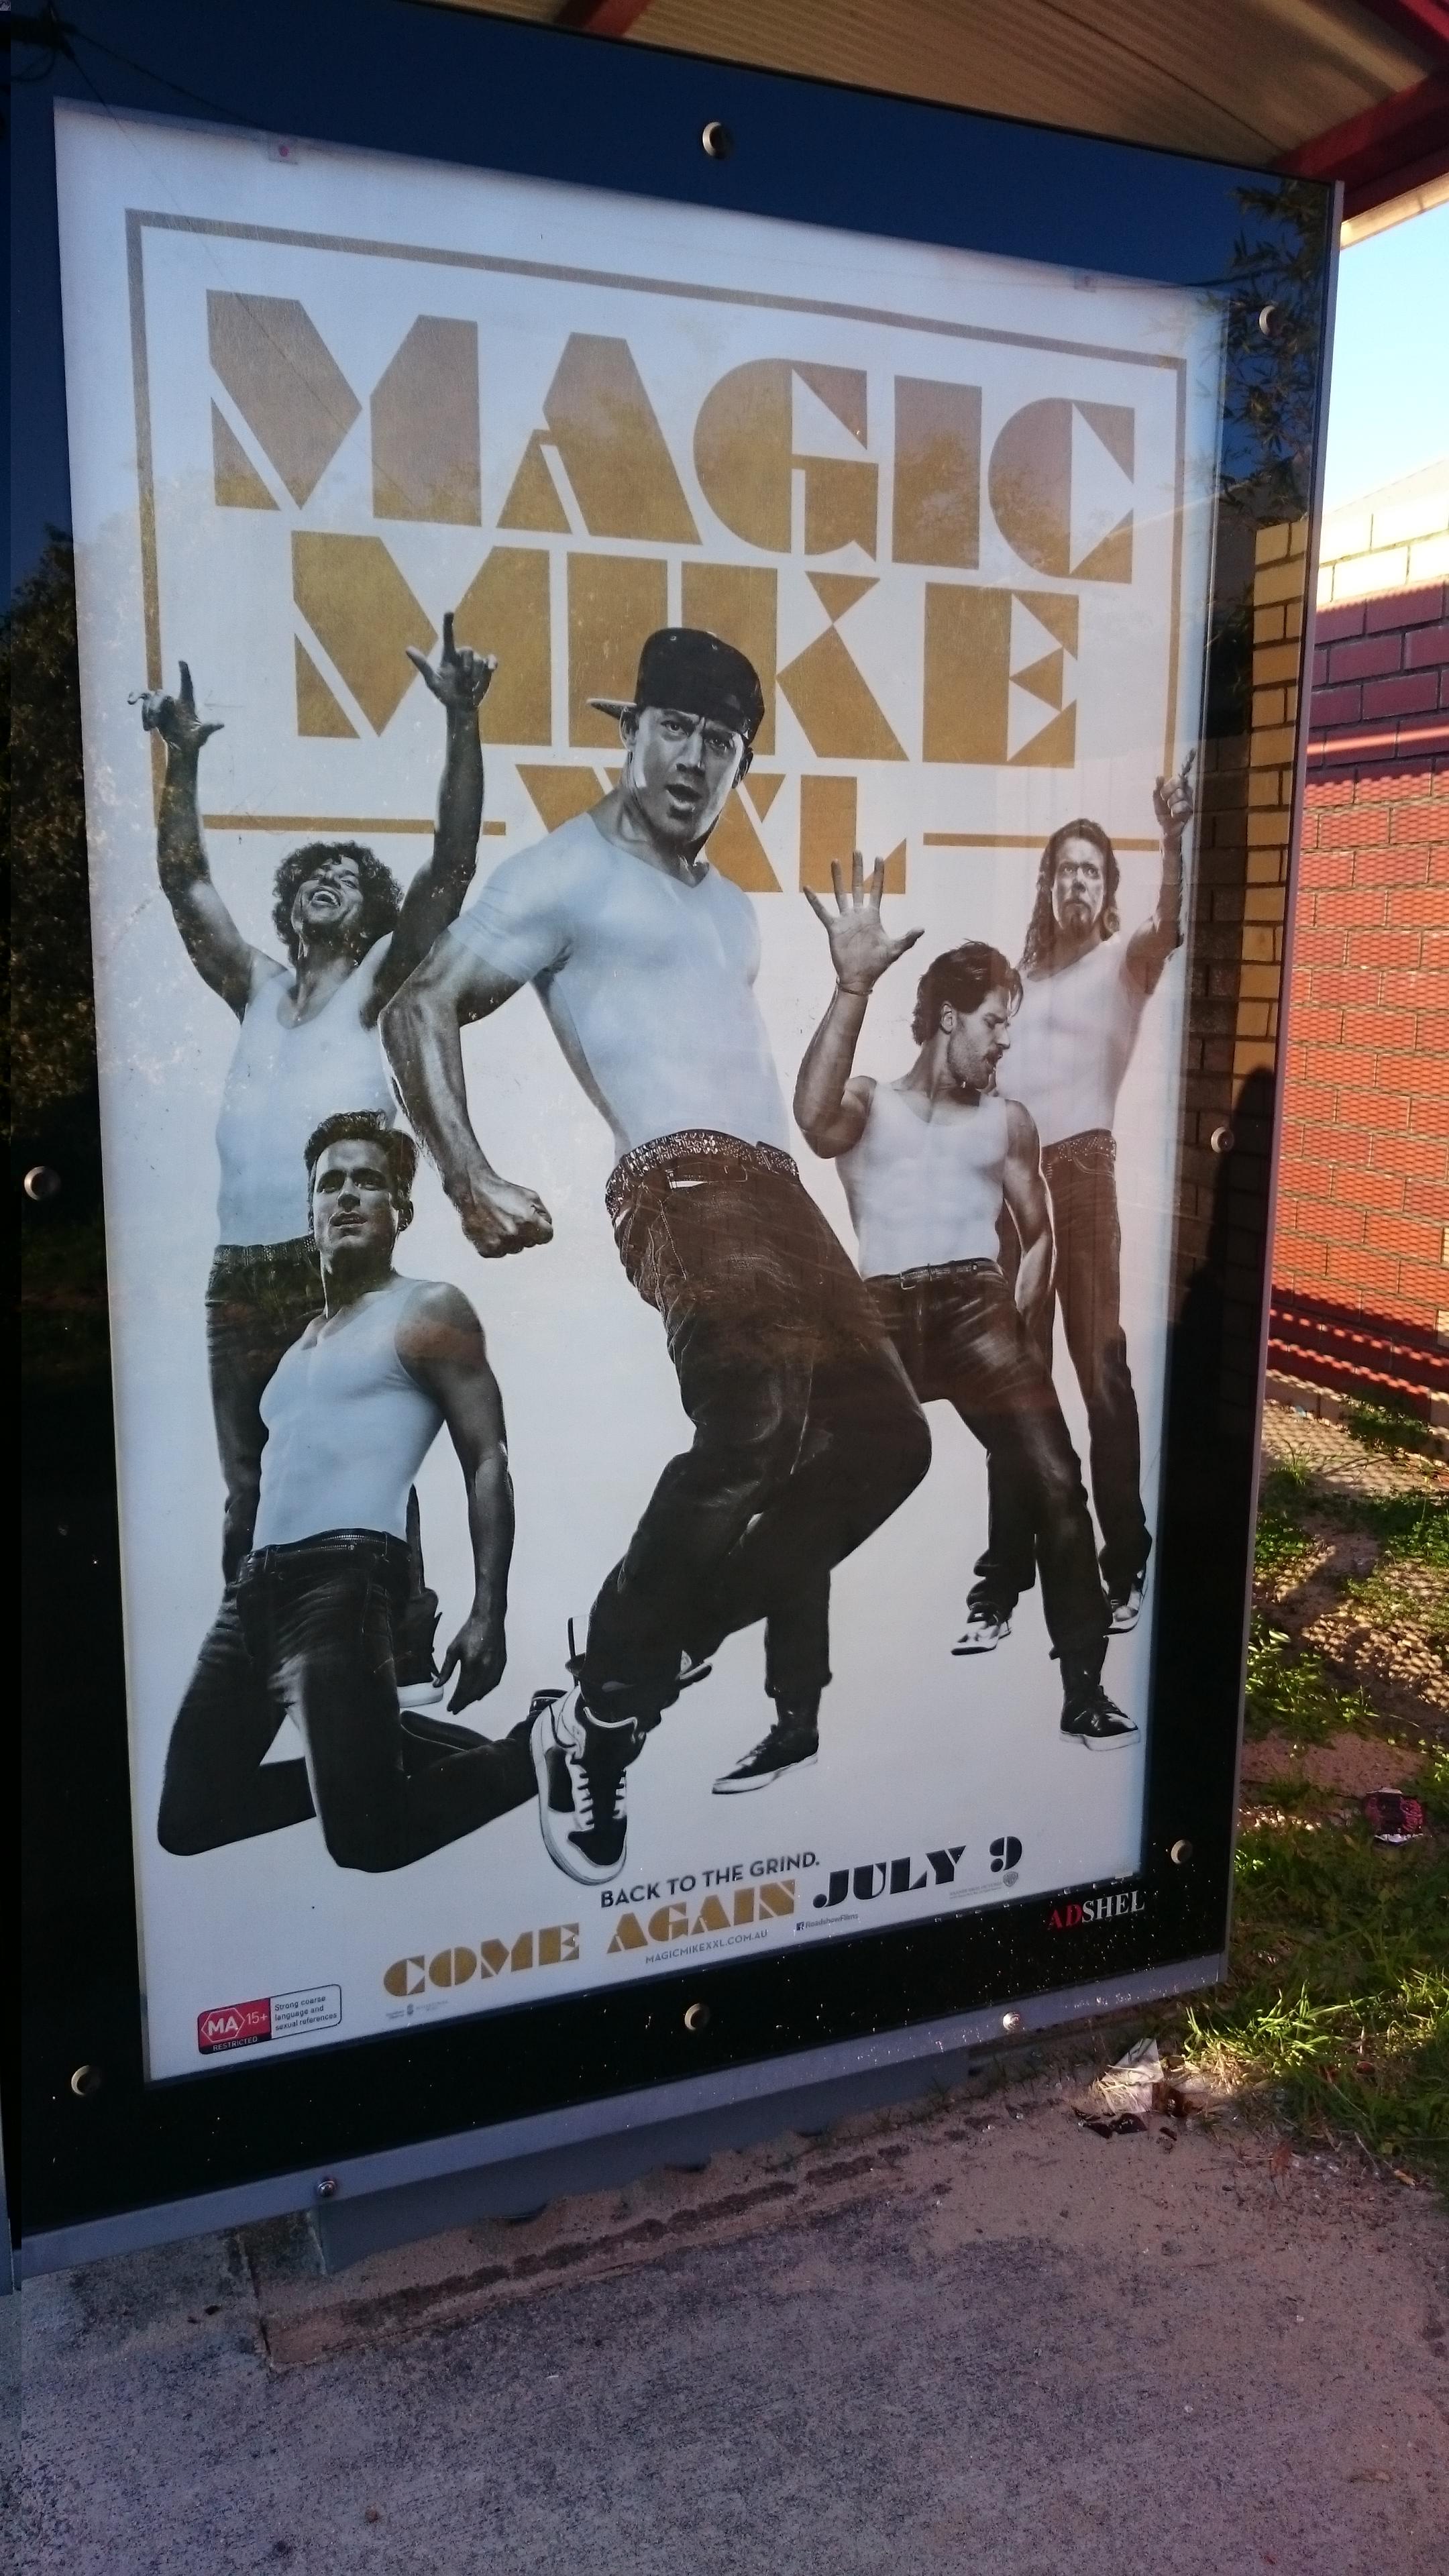 They added shirts to the Magic Mike XXL poster at this bus stop.